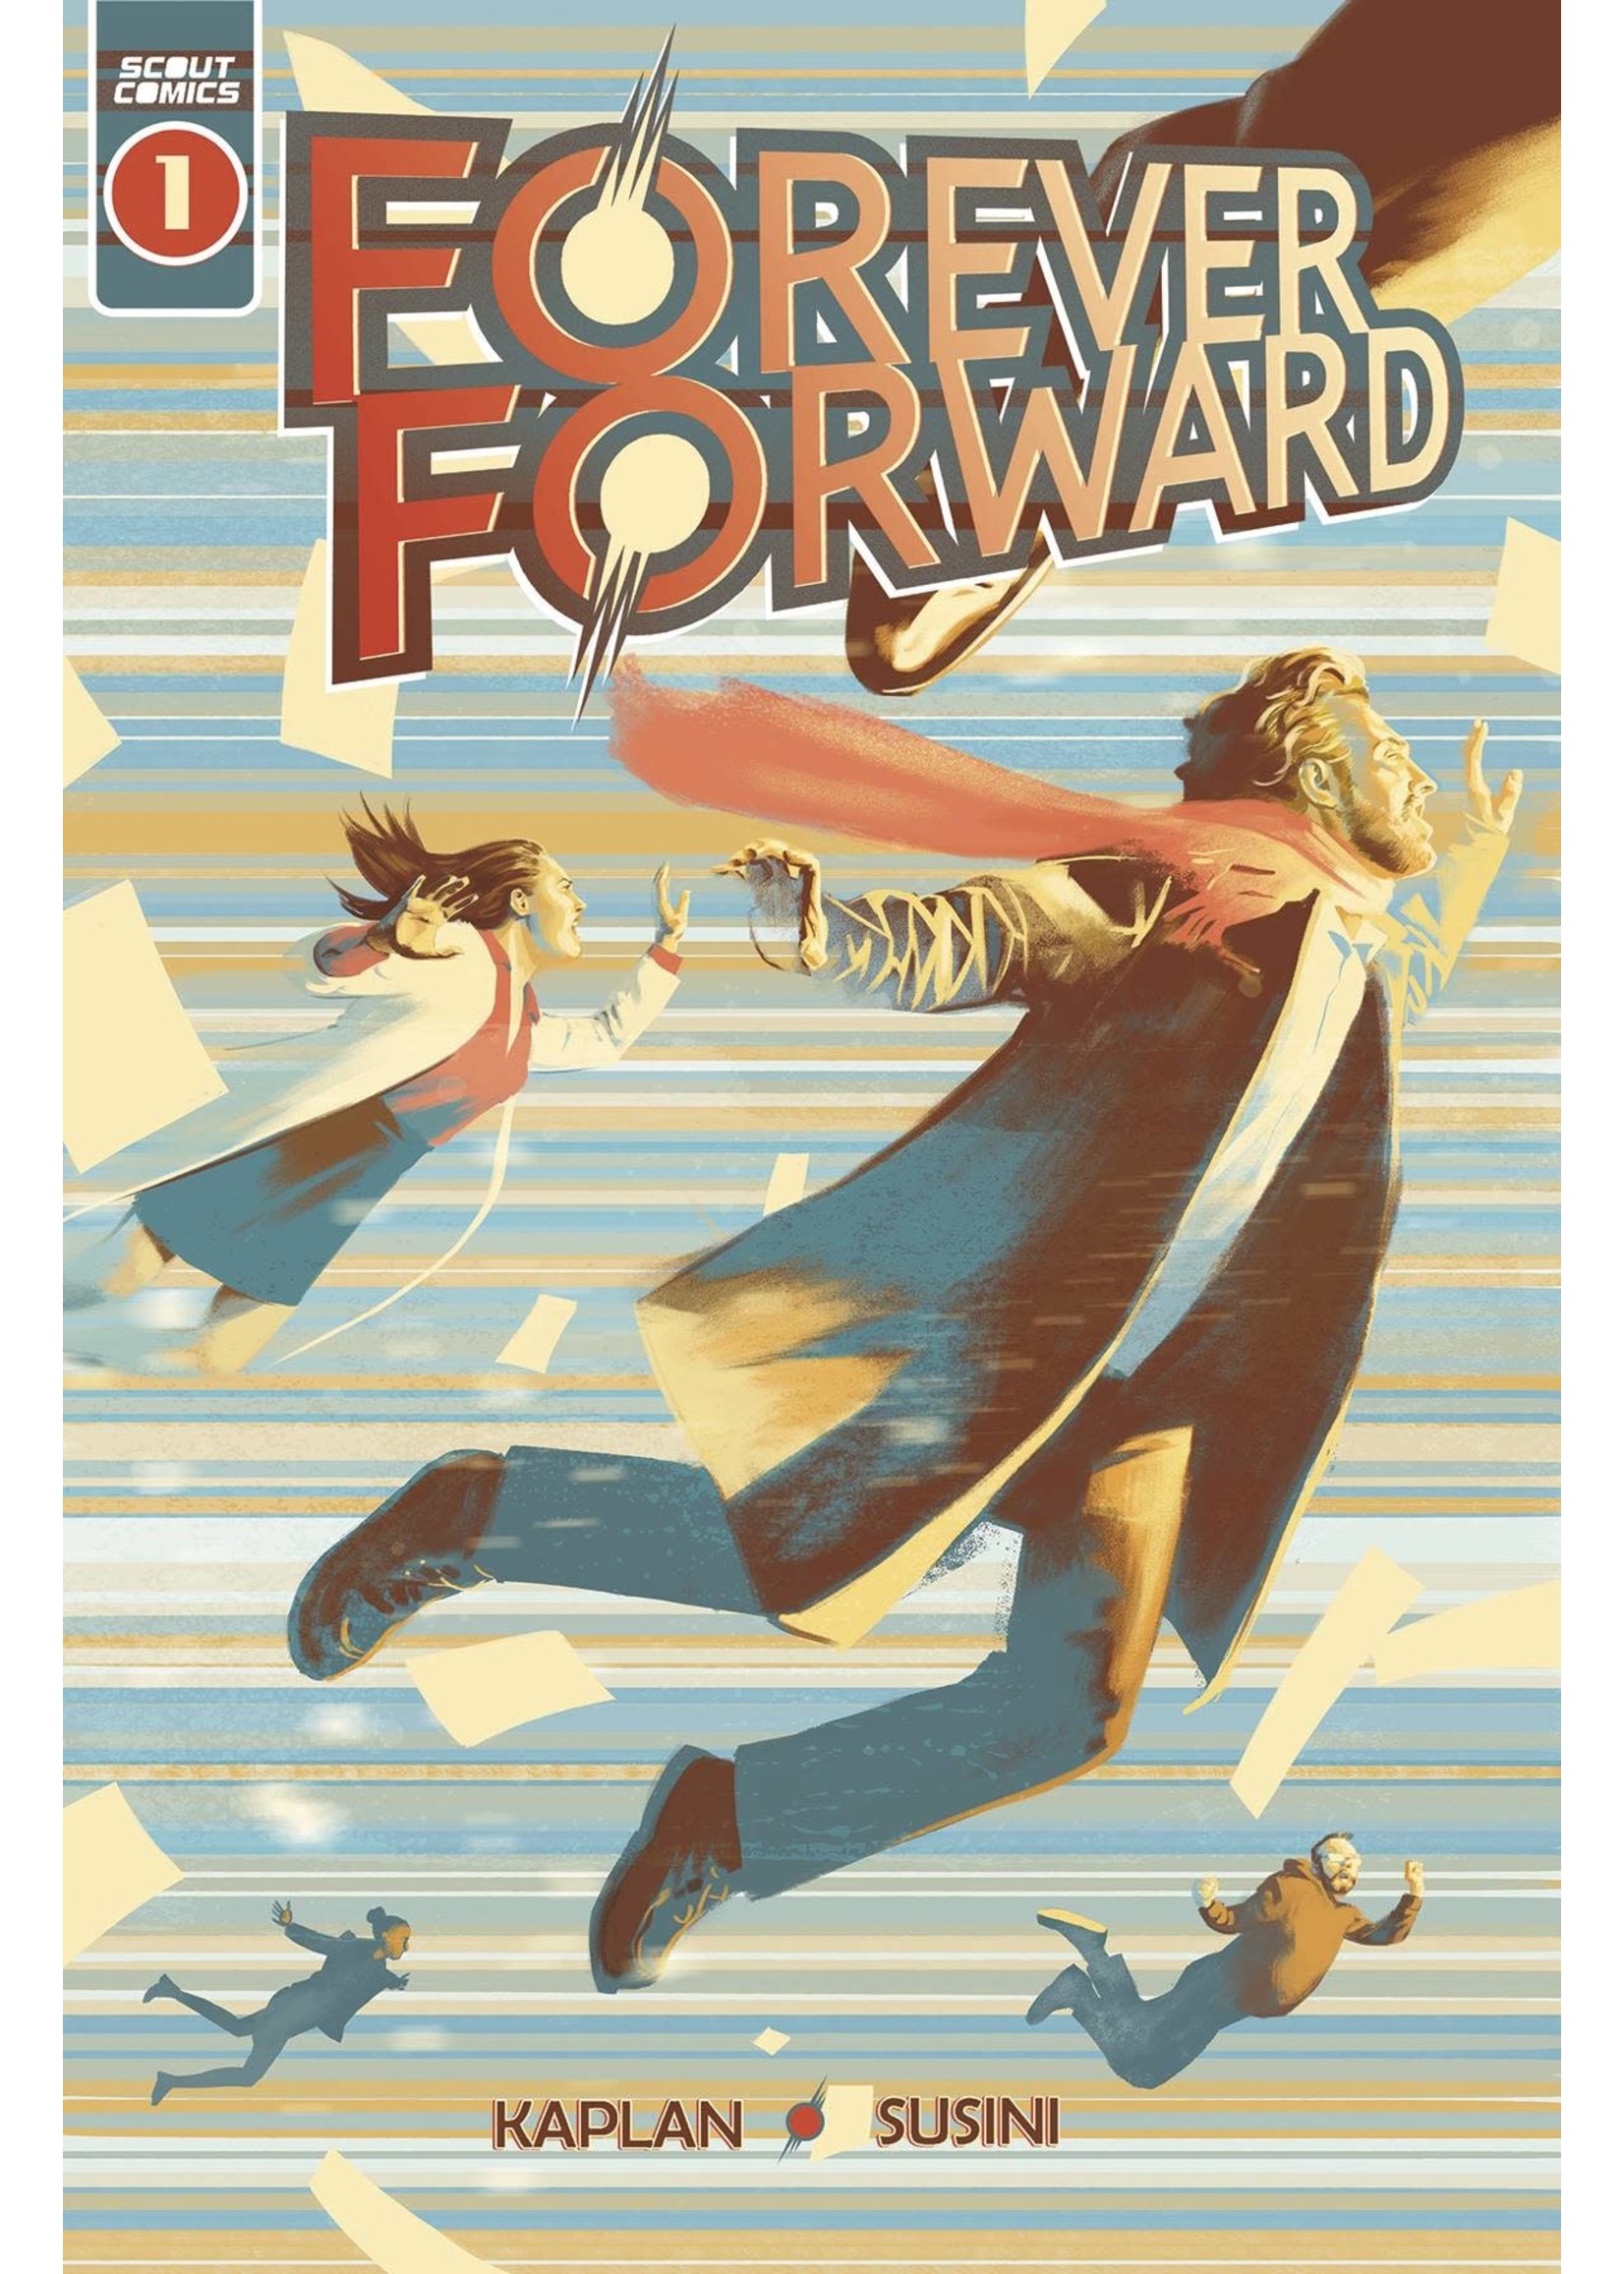 SCOUT COMICS FOREVER FORWARD #1 (OF 5) CVR A JACOB PHILLIPS